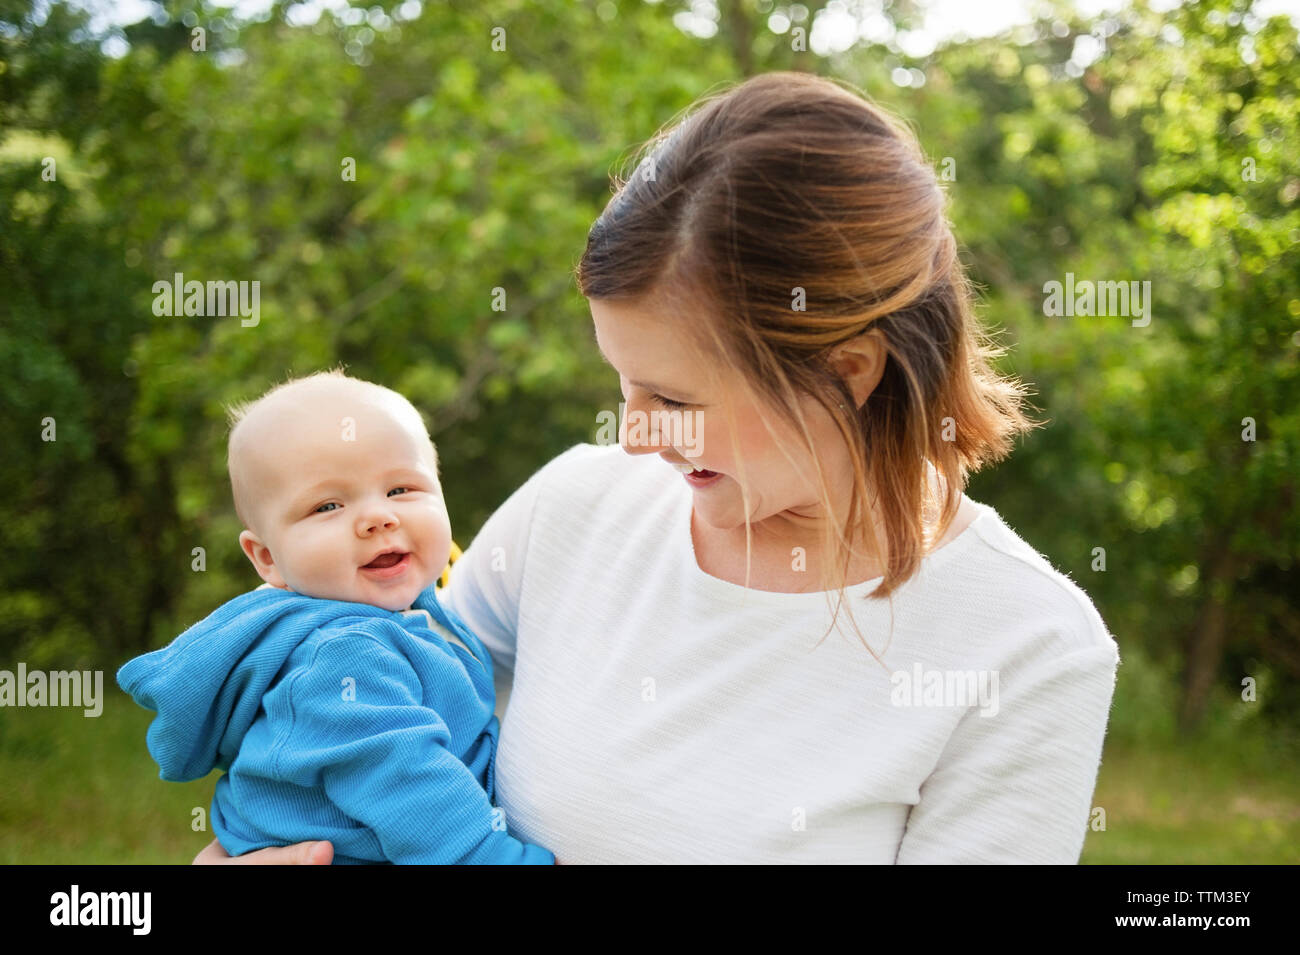 Happy woman carrying baby boy at park Banque D'Images